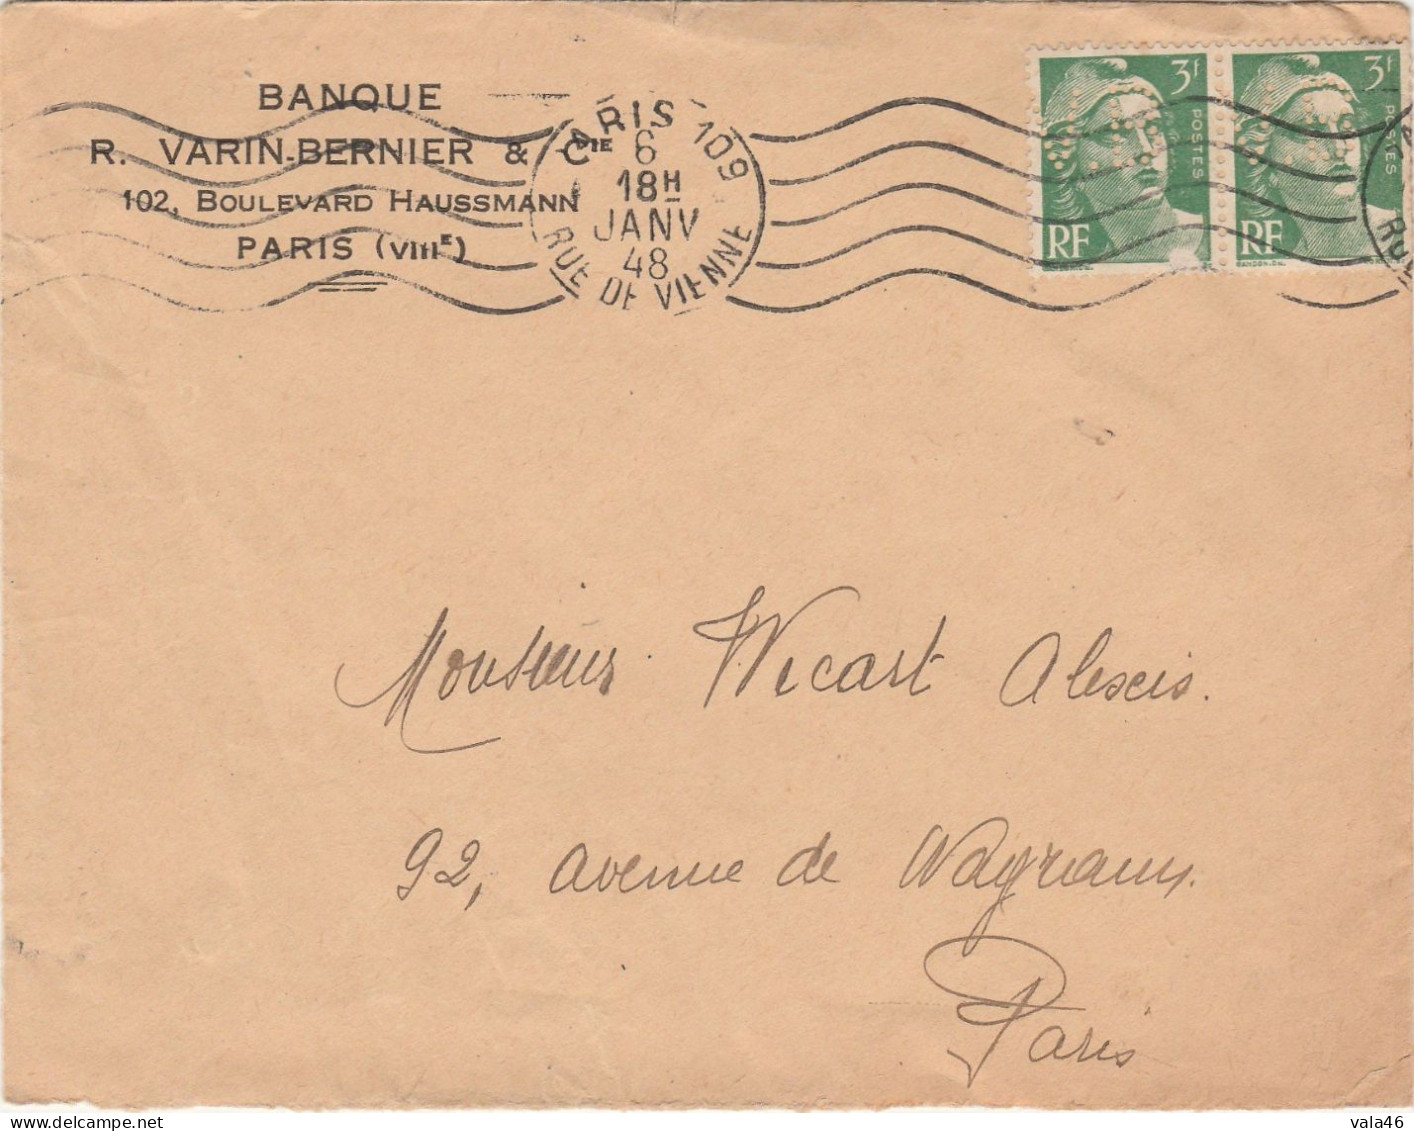 FRANCE - PERFORES  716A GANDON PAIRE  PERFORE VB  VARIN BERNIER - Covers & Documents